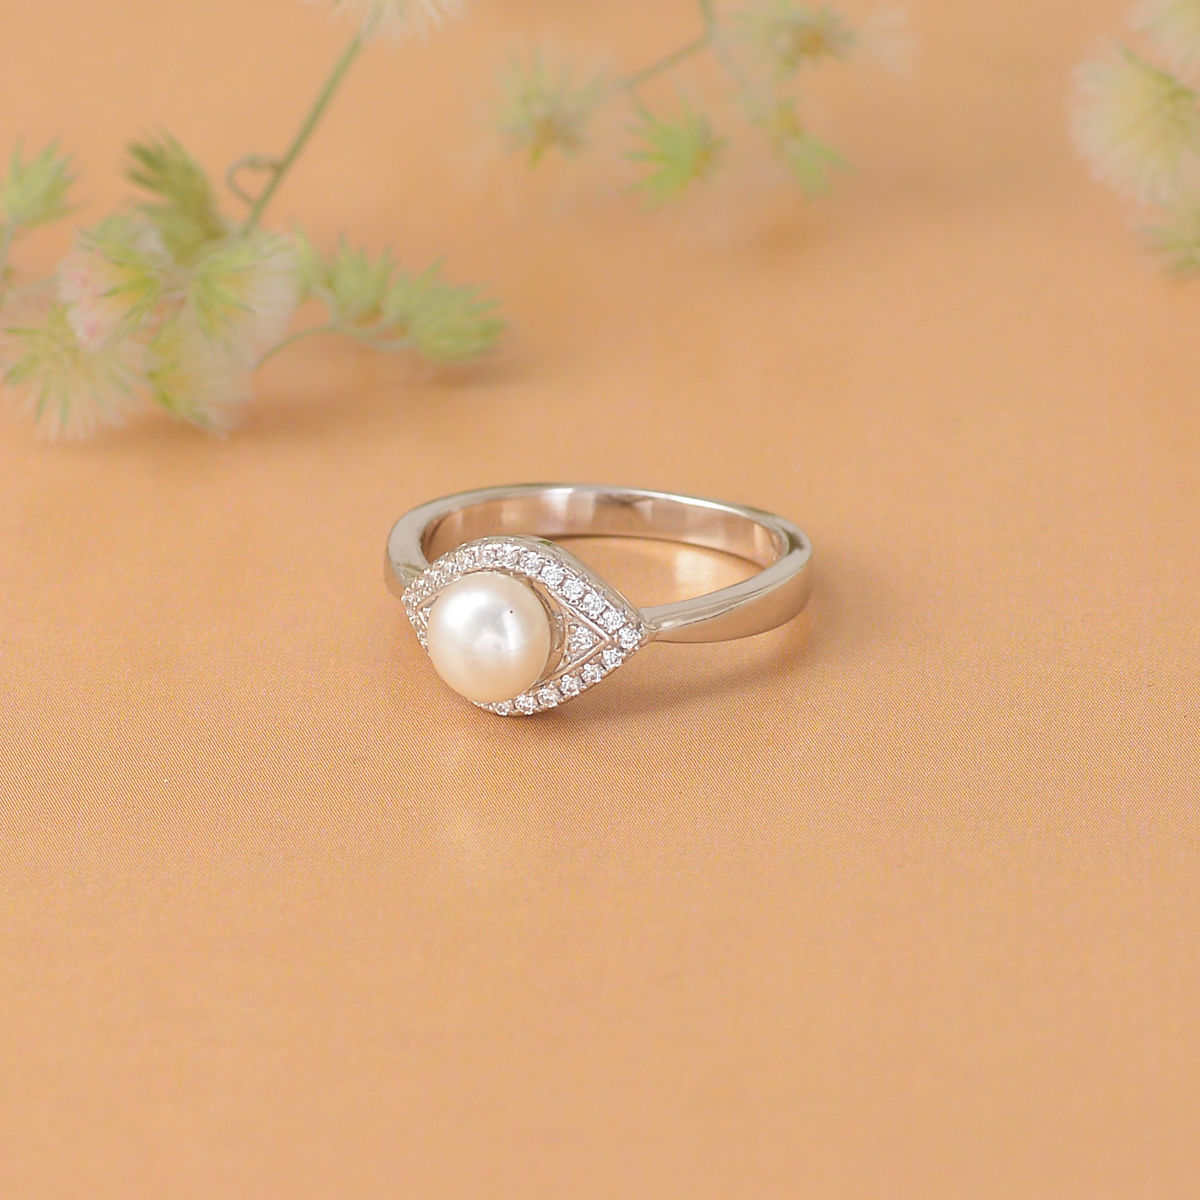 Beautiful Pearl Ring White Pearl Gemstone Ring Brass Ring Unique Ring  Handmade Gemstone Pearl Ring Best Friend Ring Gift Ring - Etsy